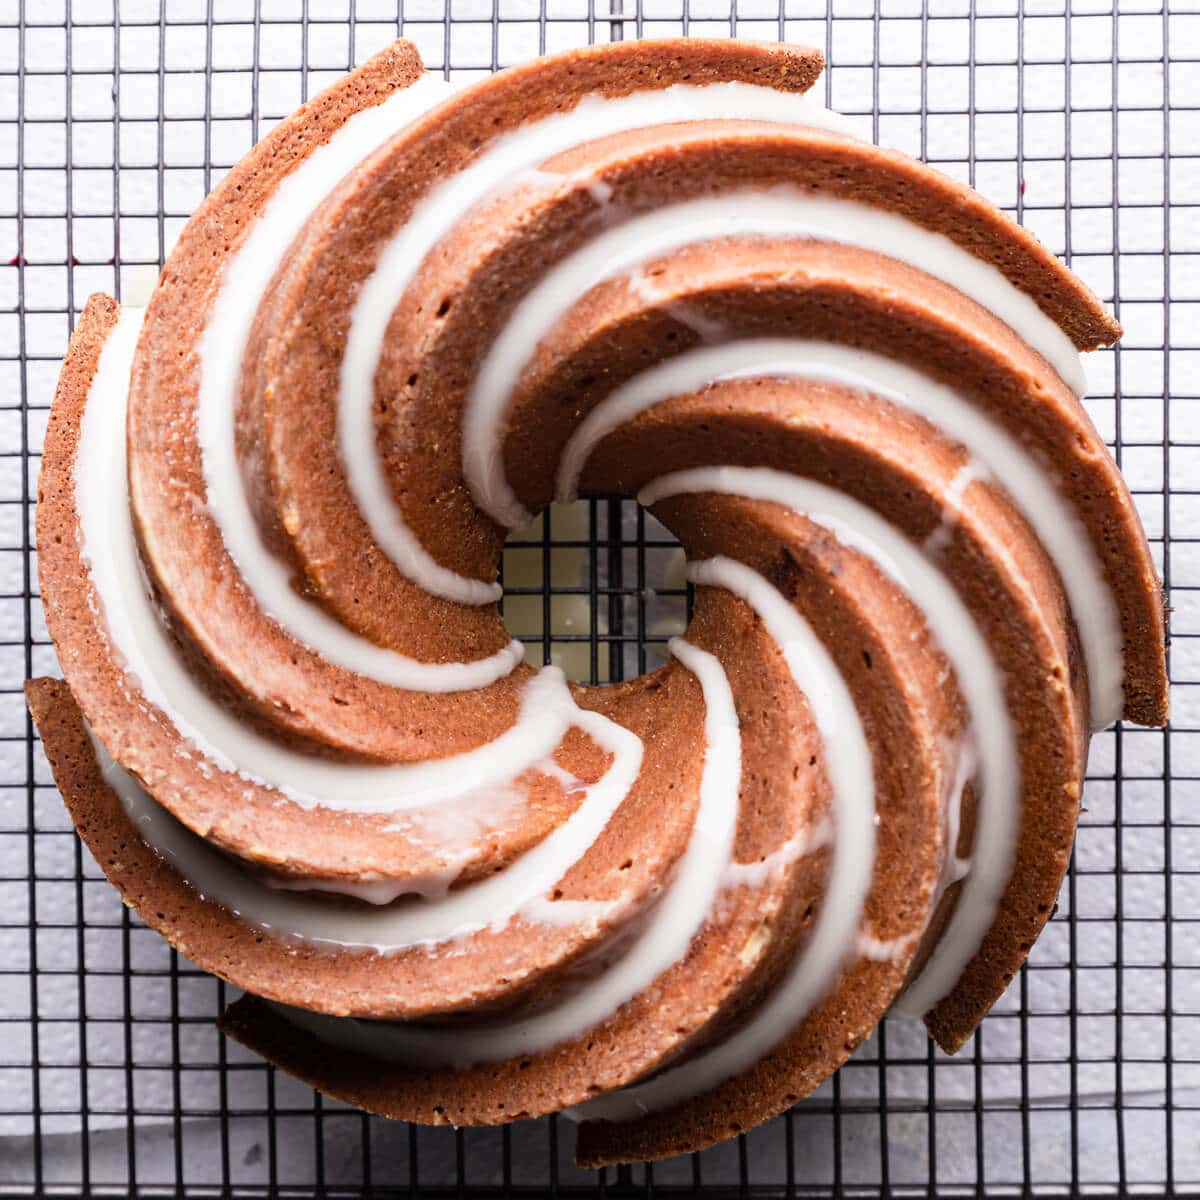 orange cranberry bundt cake drizzled with glaze on a cooling rack.